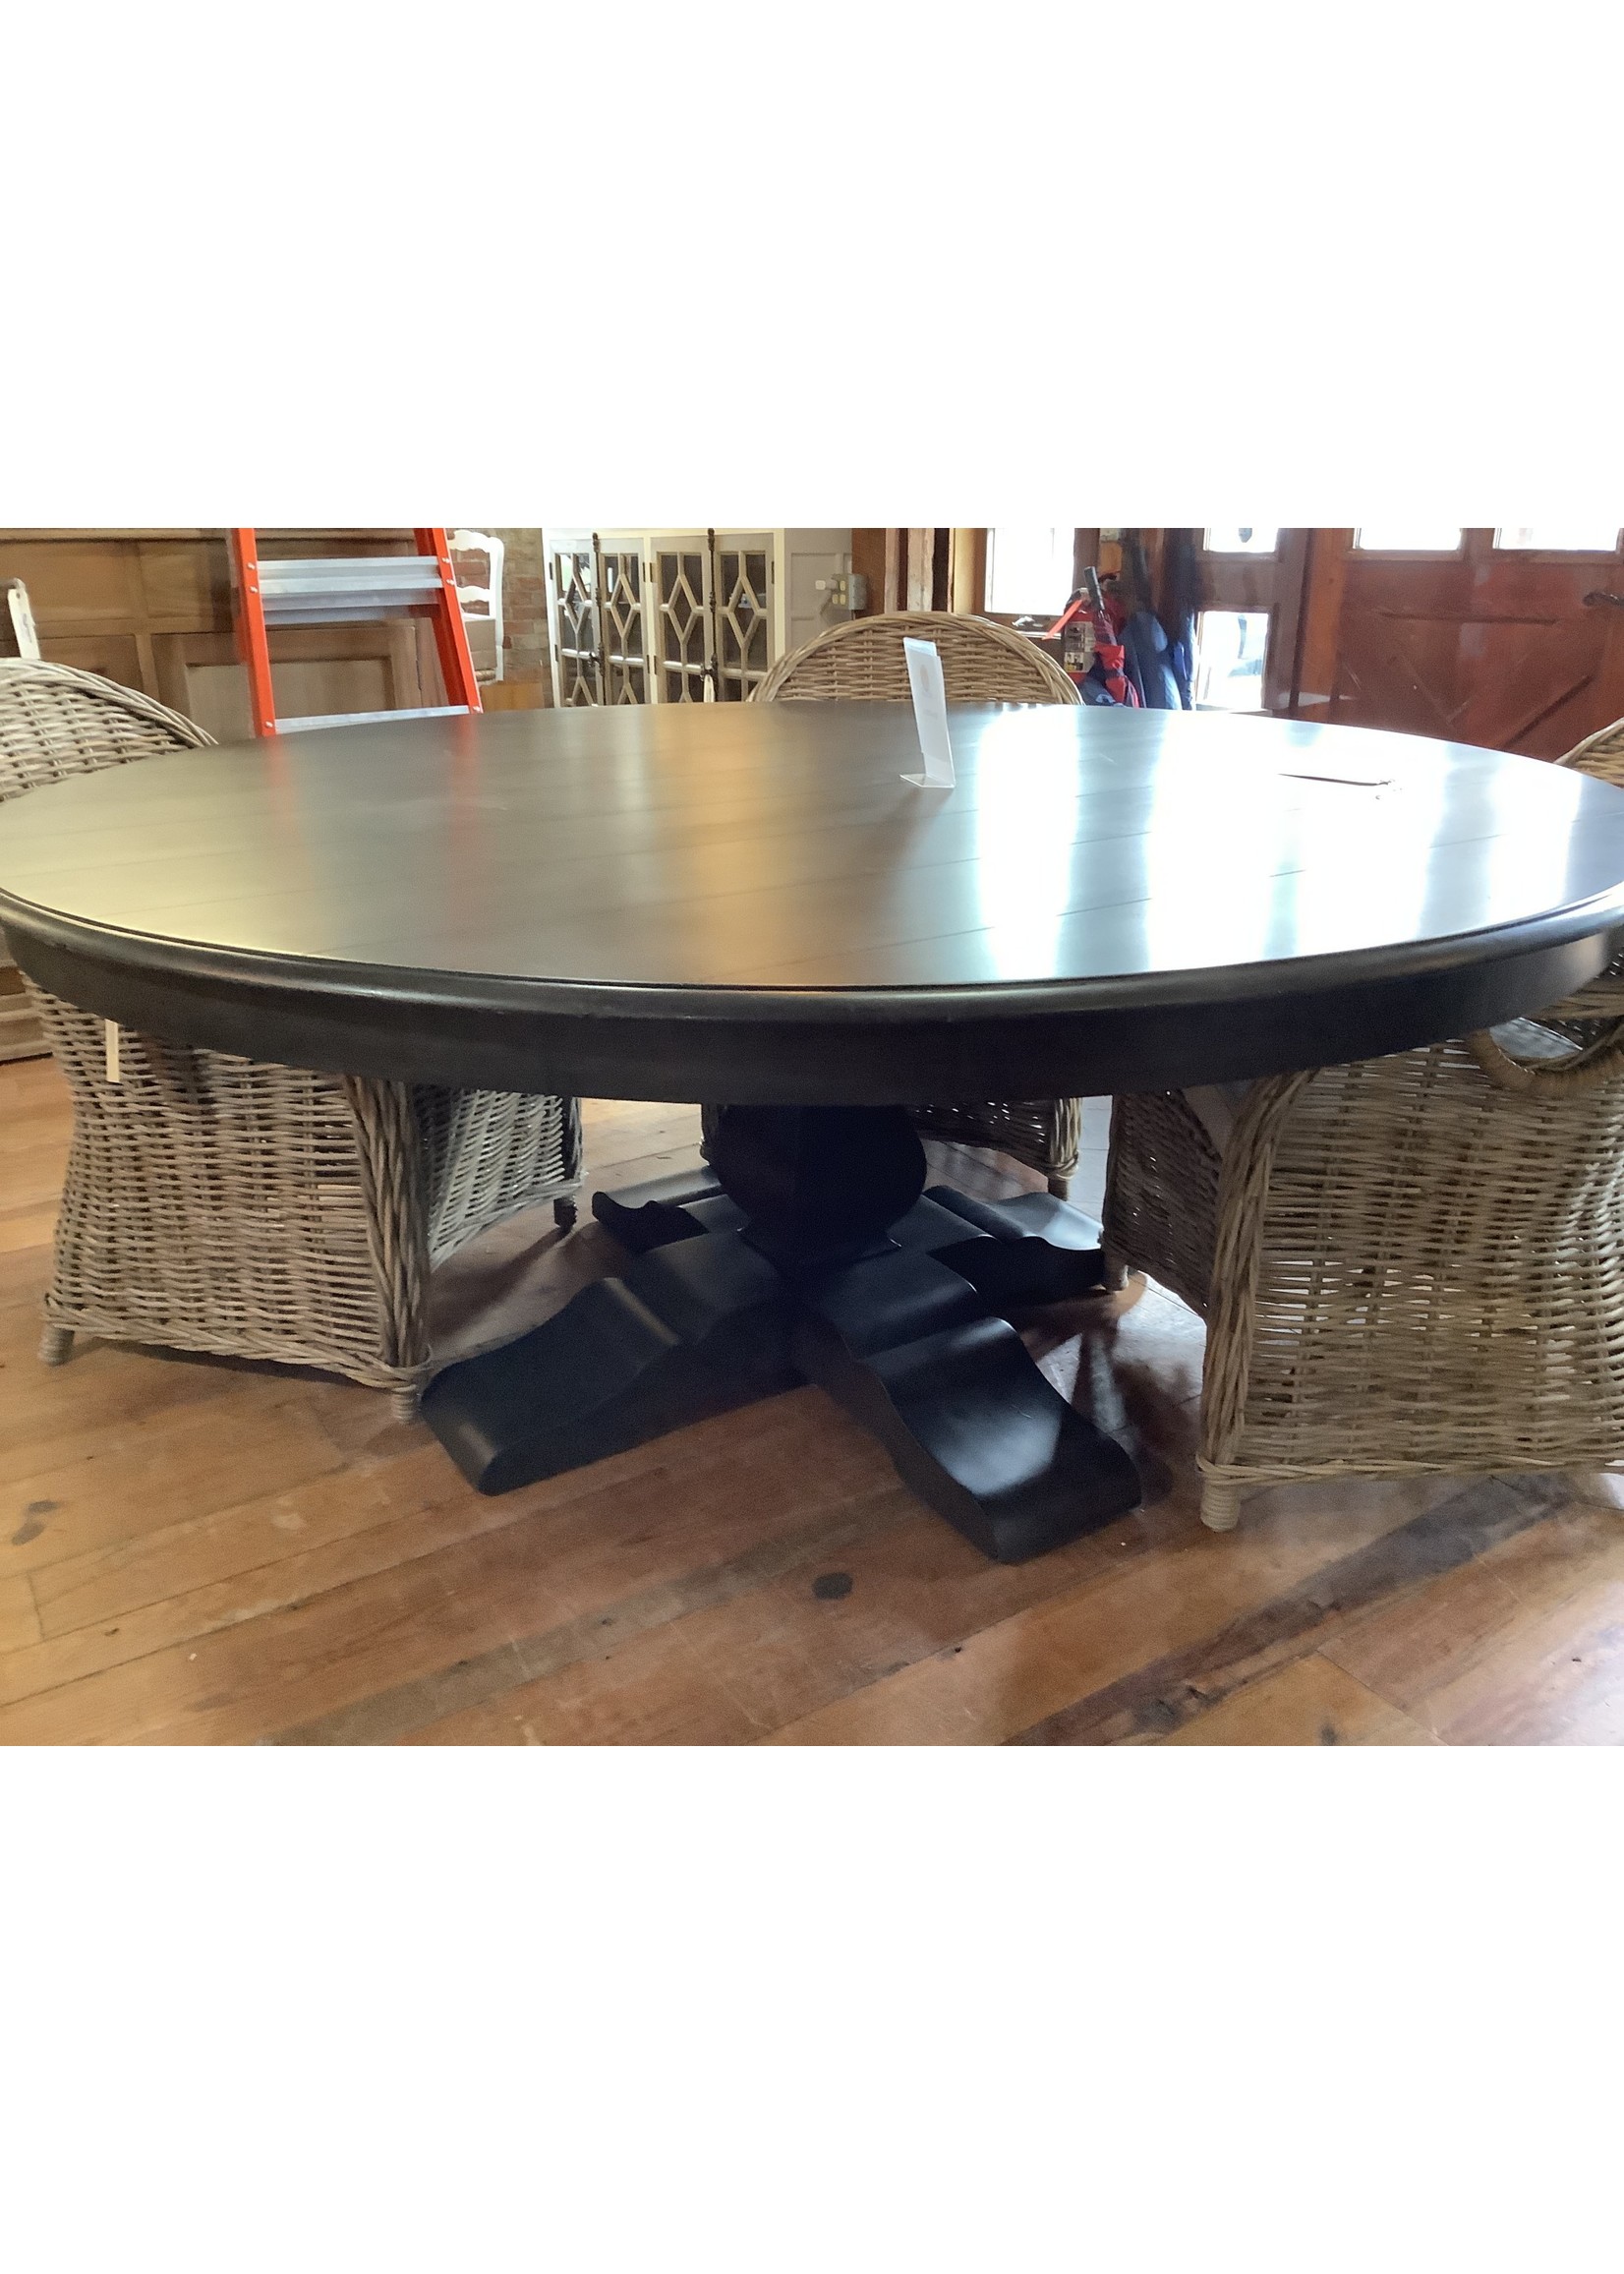 Bramble OW SPECIAL SALE Trestle Round Dining Table 72"